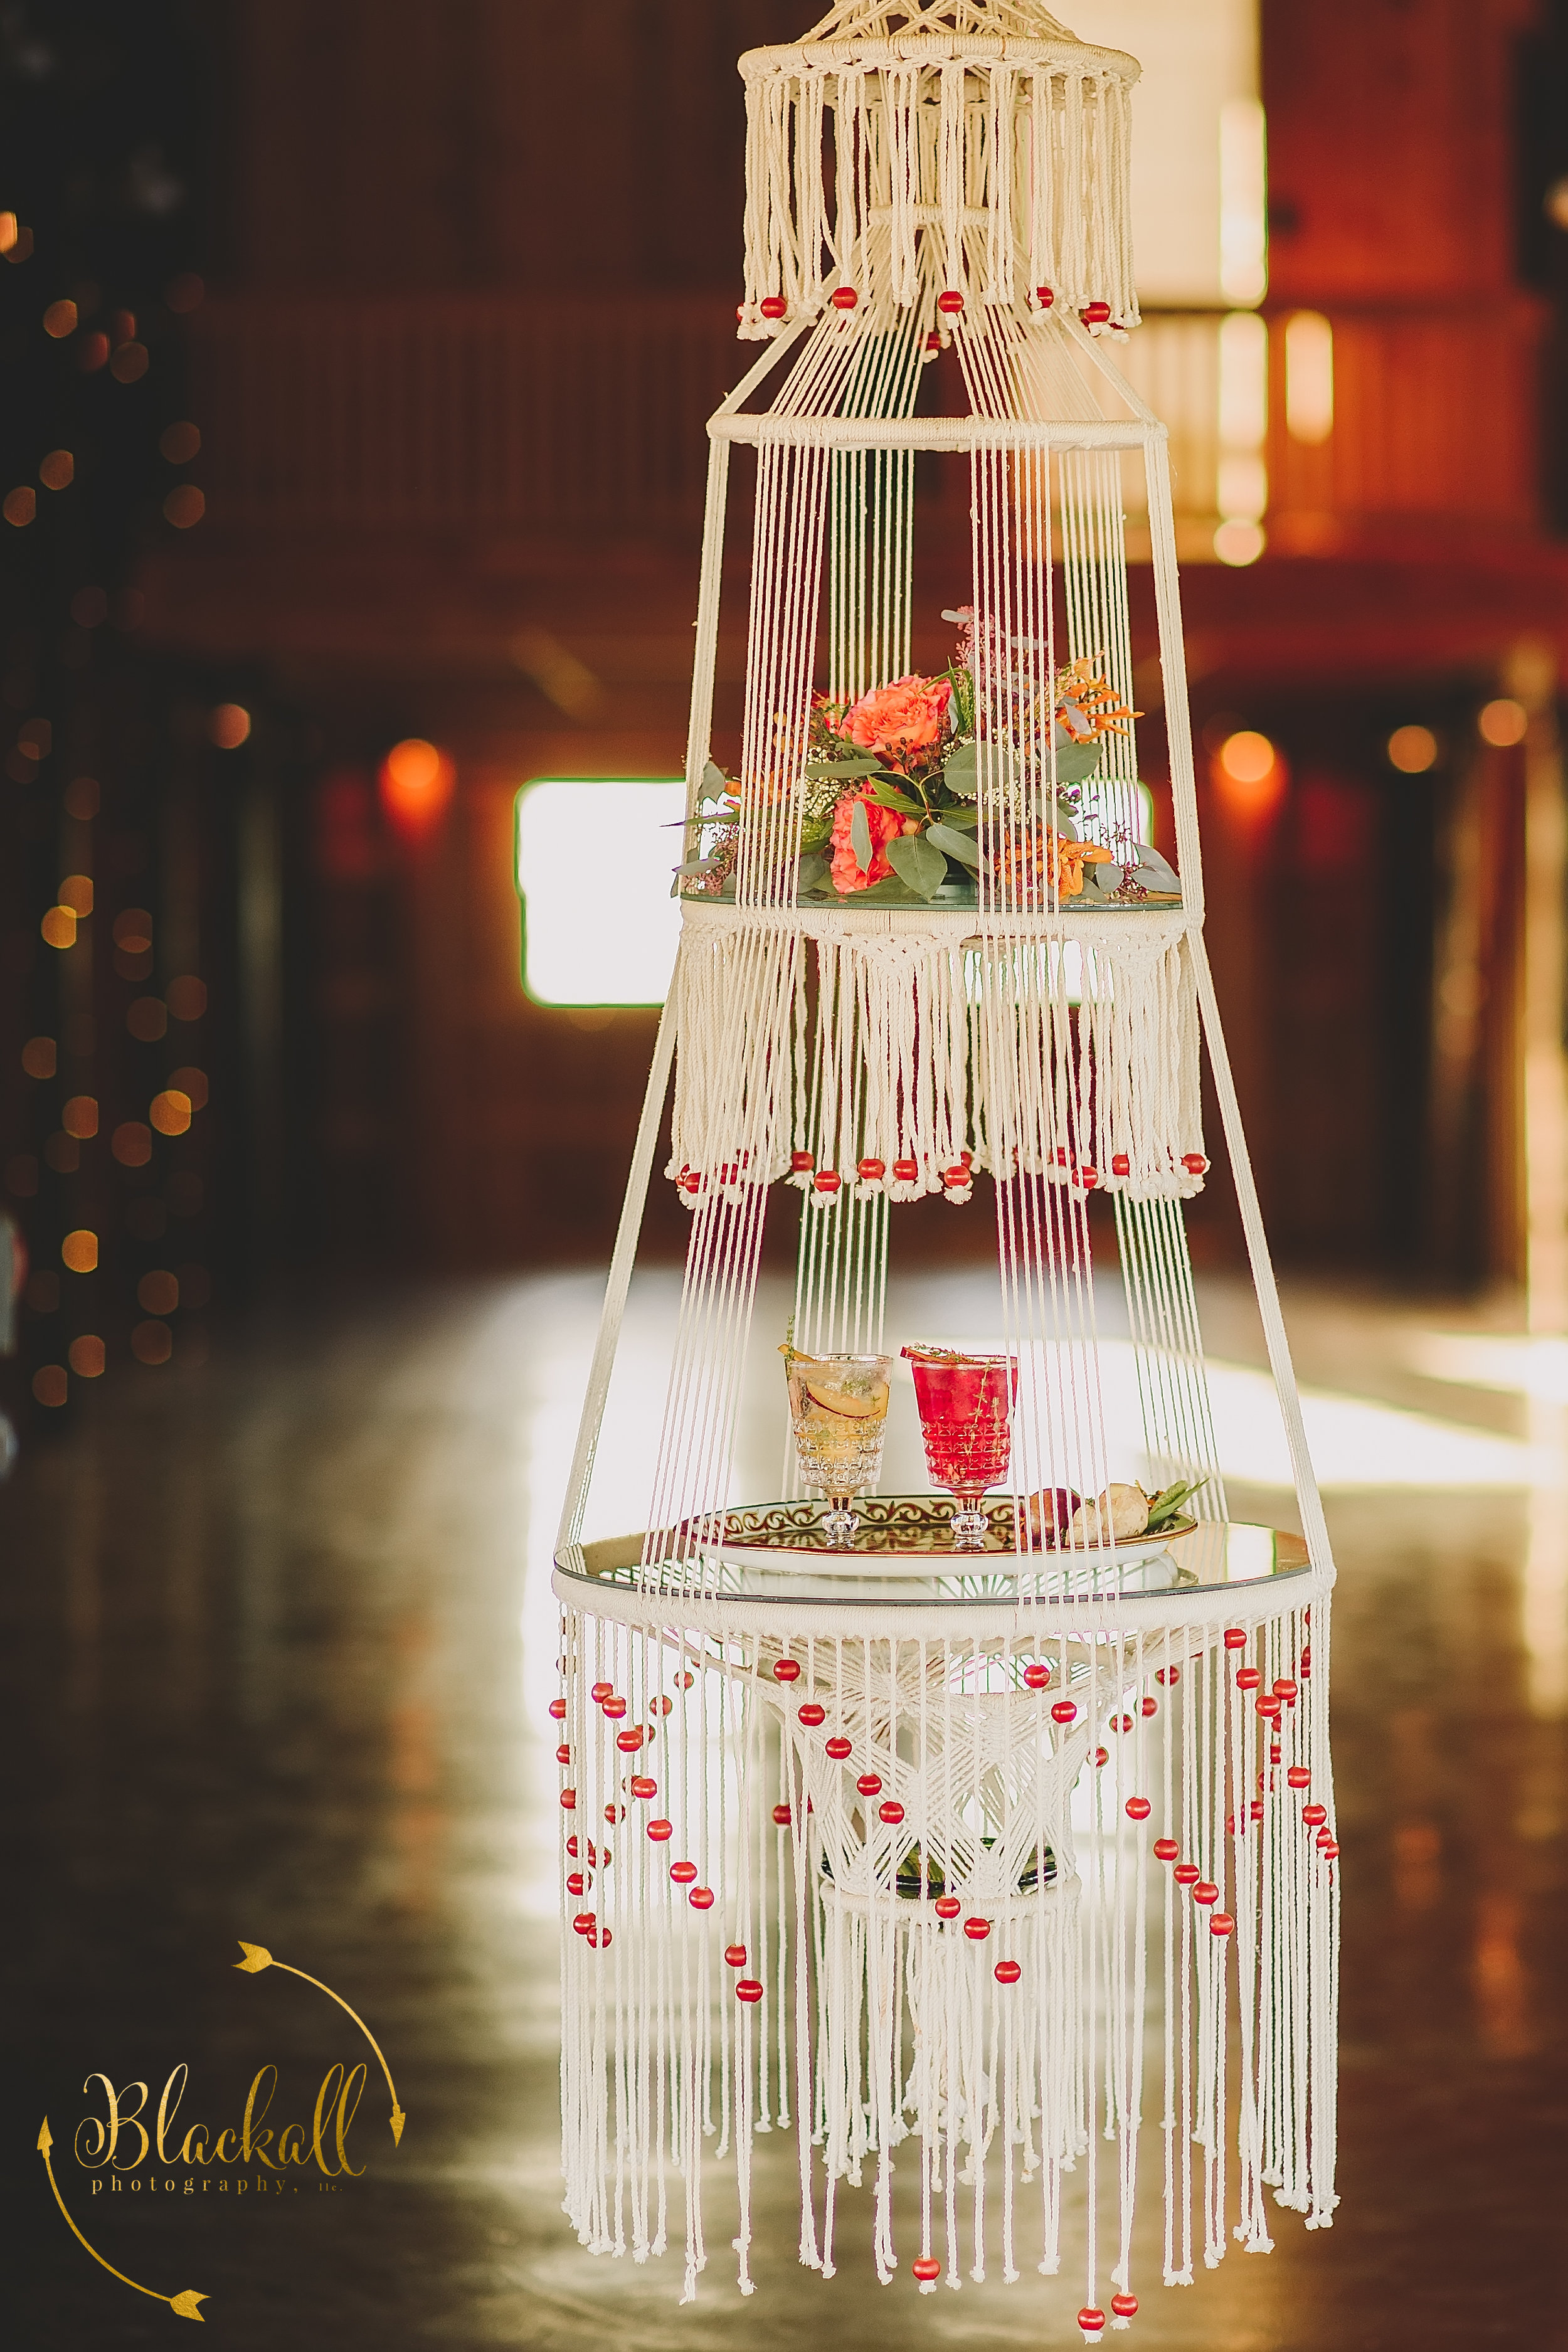  Cheers! What a original way to deliver drinks to the bride + groom! I love this Macrame Hanging Table!!   